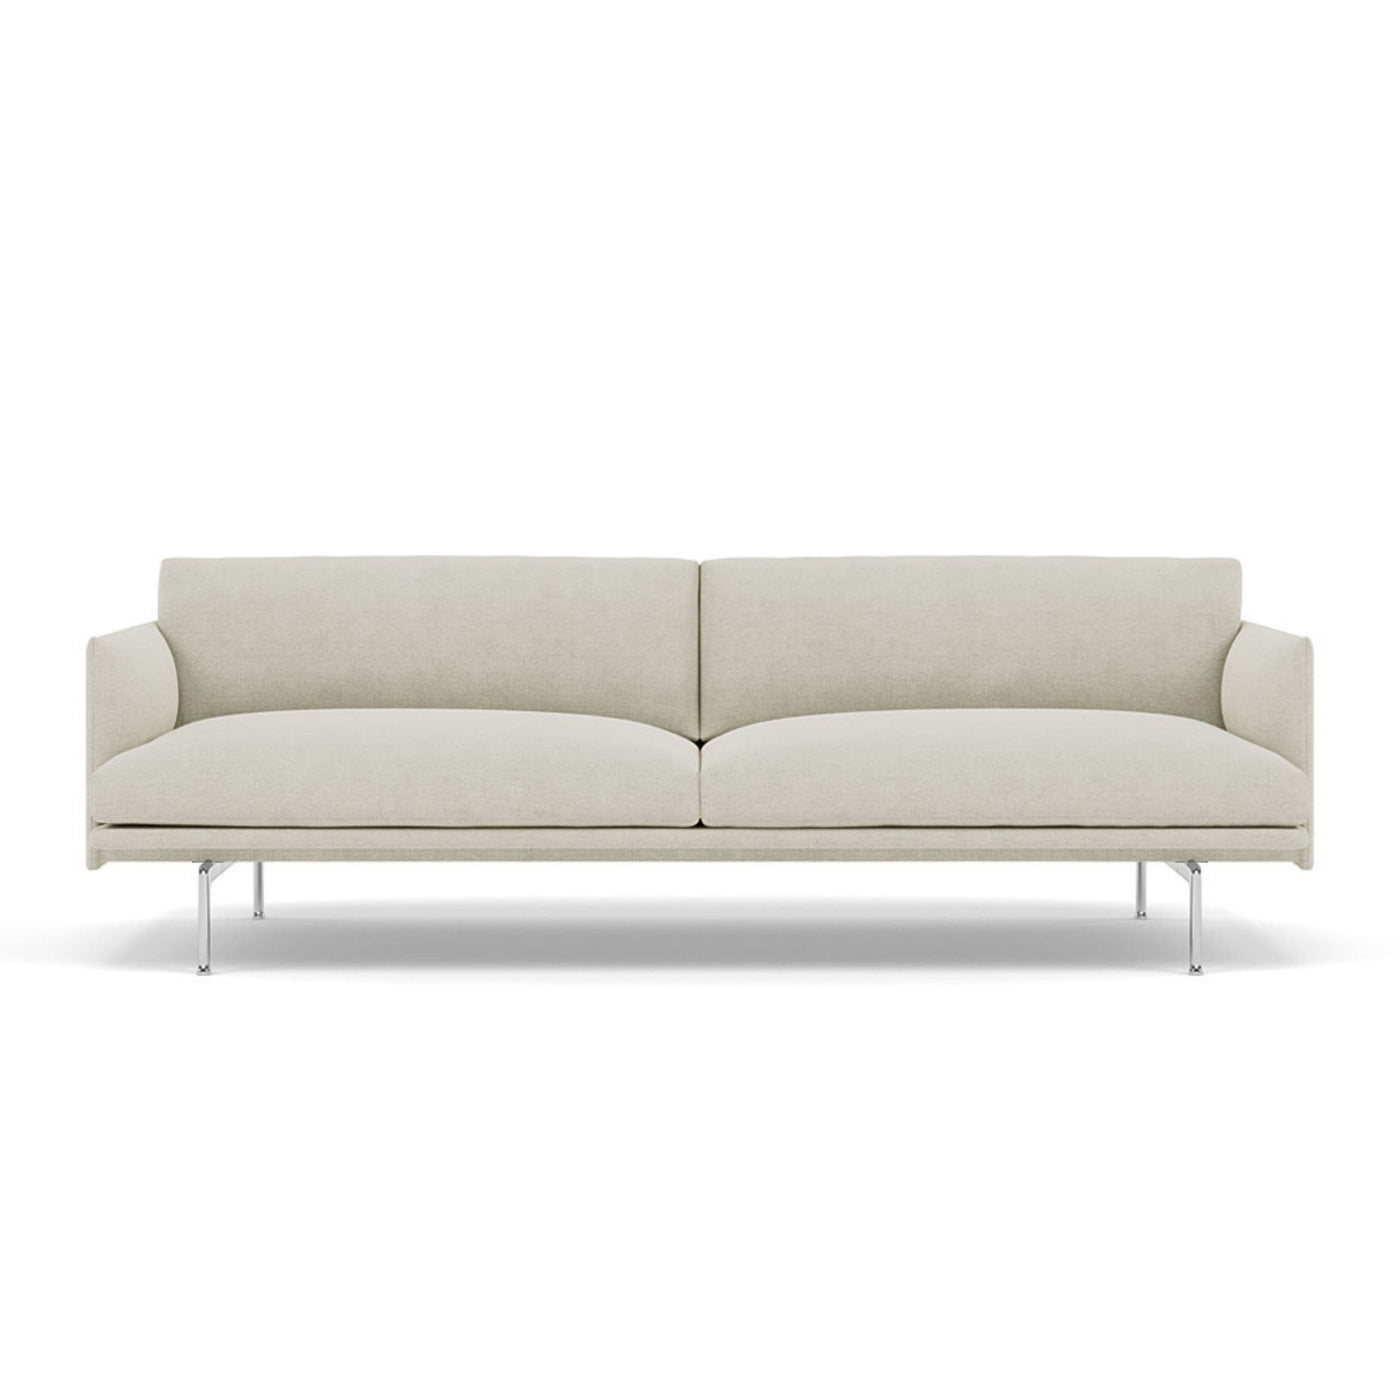 Muuto outline 3 seater sofa with polished aluminium legs. Made to order from someday designs. #colour_fiord-101